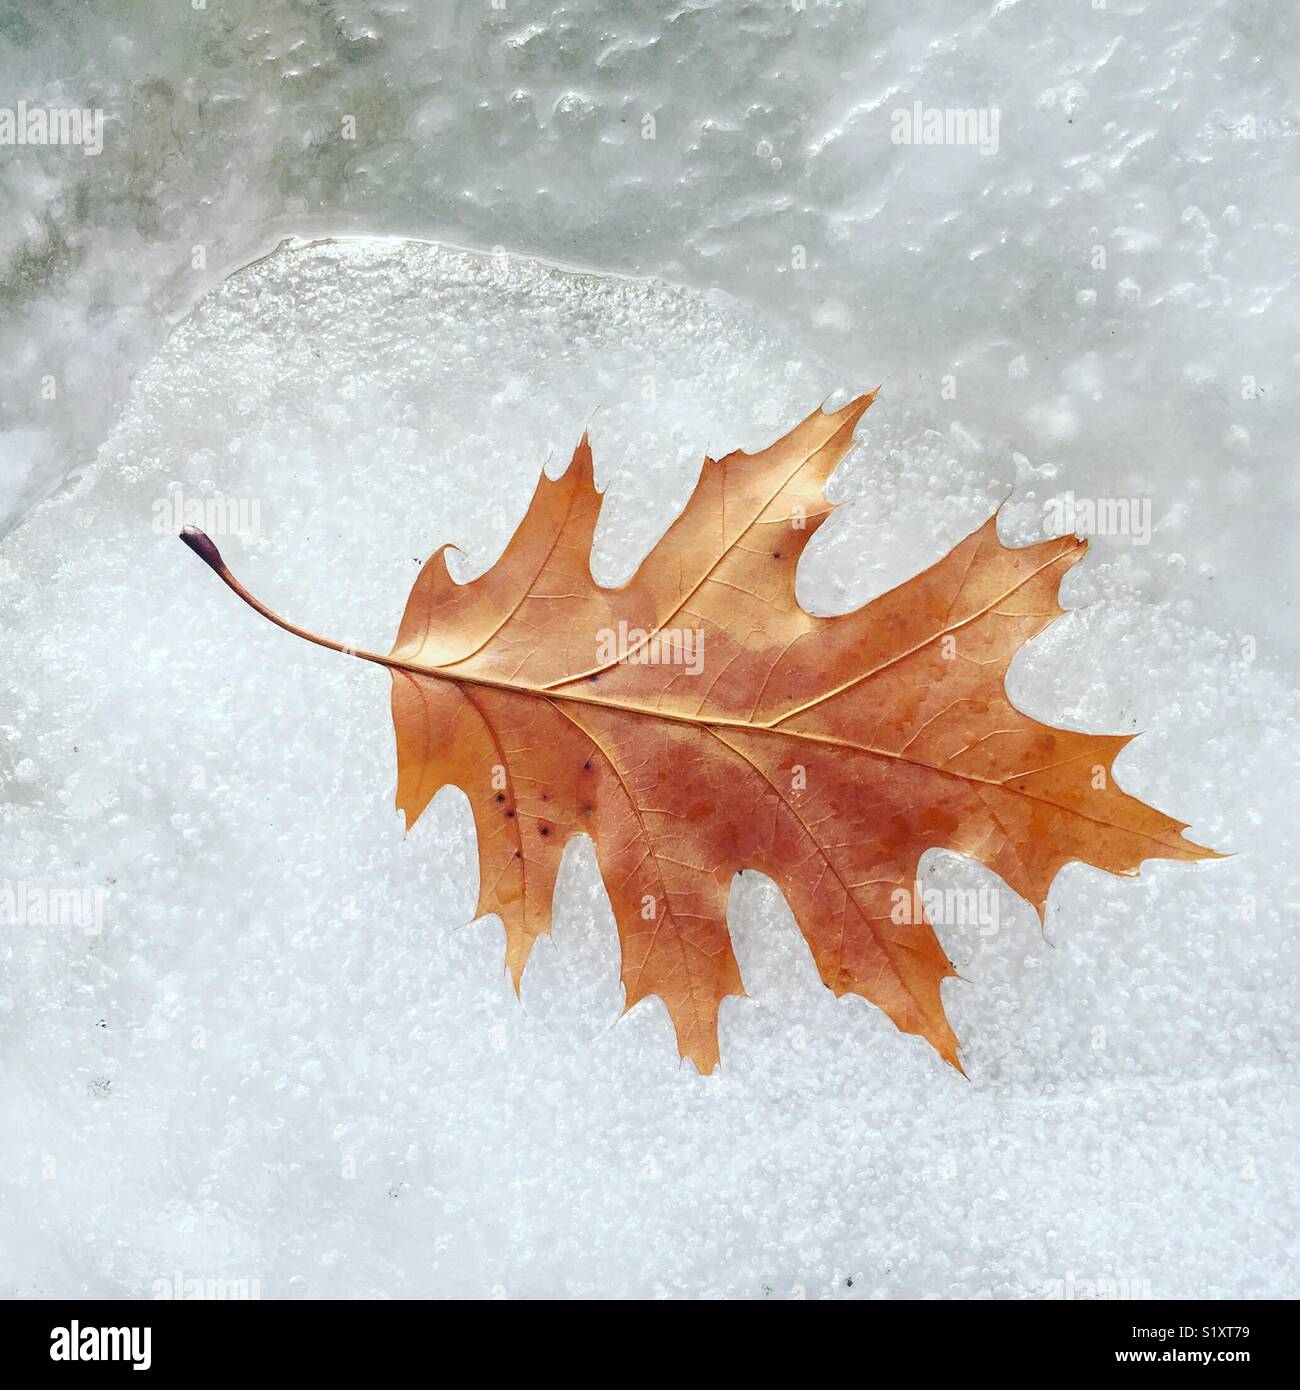 A frozen maple leaf from fall appearing after first snow started to melt by K.R. Stock Photo